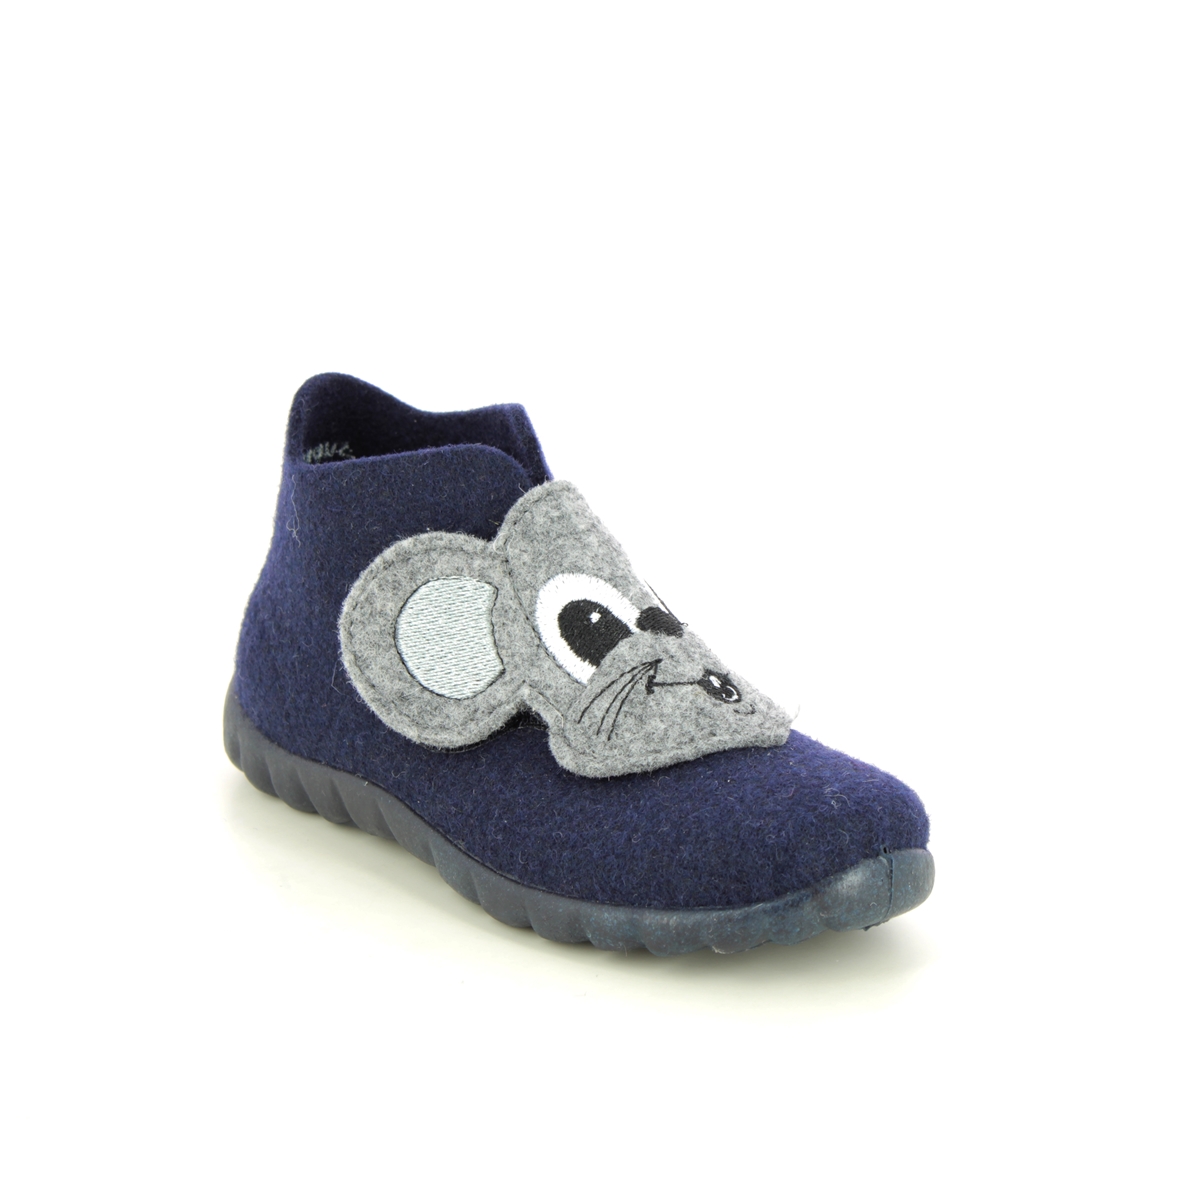 Superfit Happy Mouse Navy Kids Boys Slippers 0800294-8100 in a Plain  in Size 23